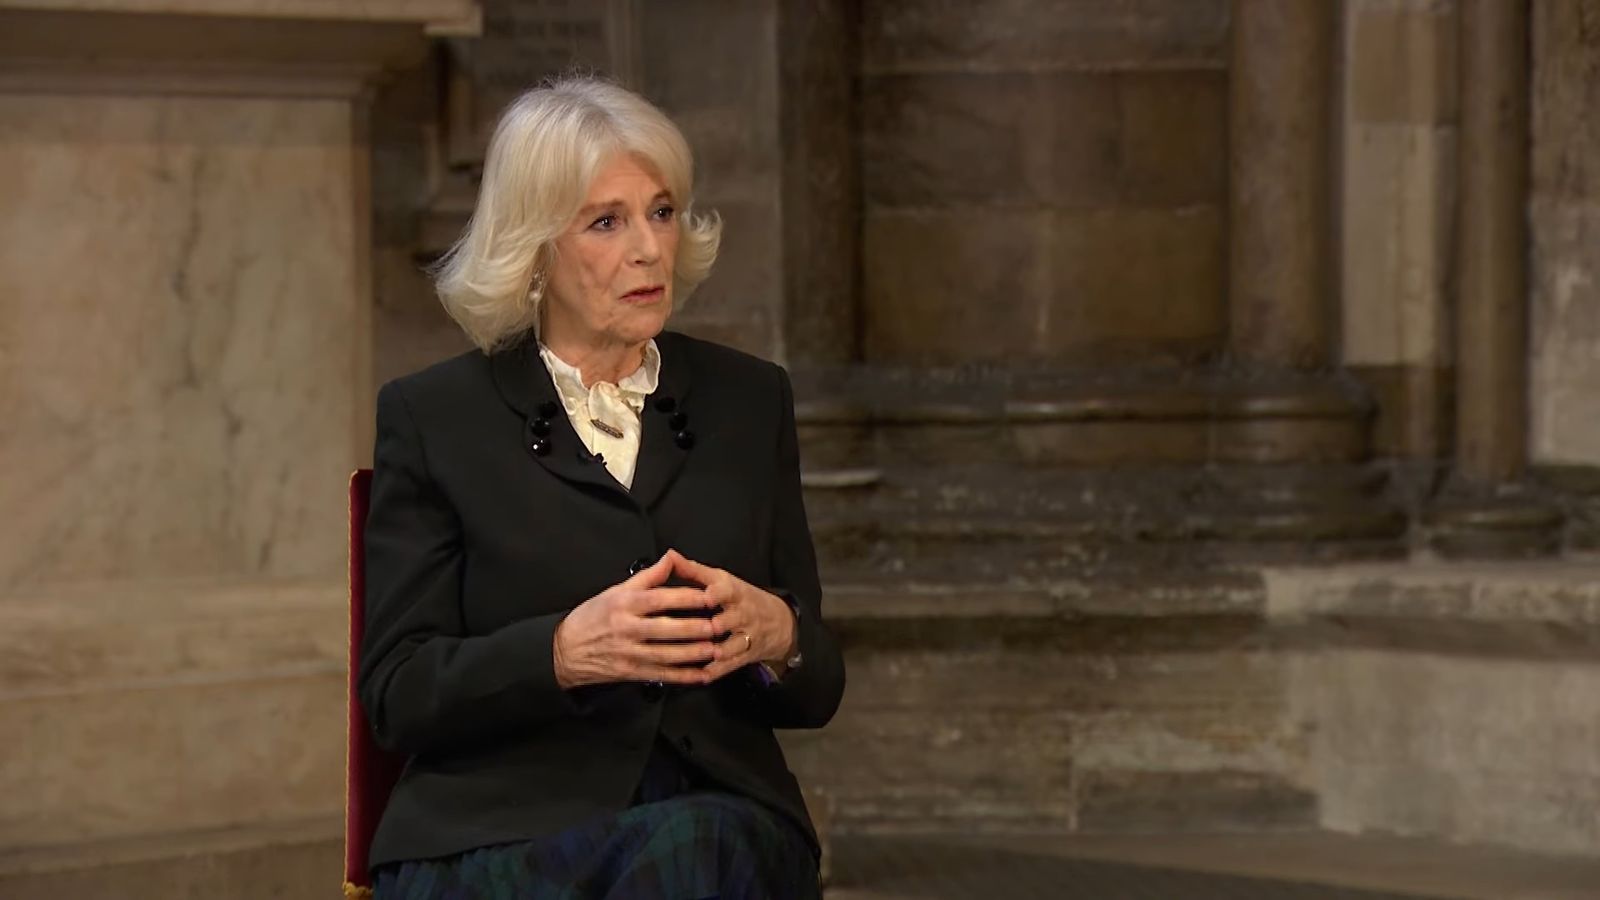 queen-consort-camilla-showed-gestures-of-anxiety-at-remembrance-sunday-king-charles-wife-leaned-on-kate-middleton-for-support-source-claims